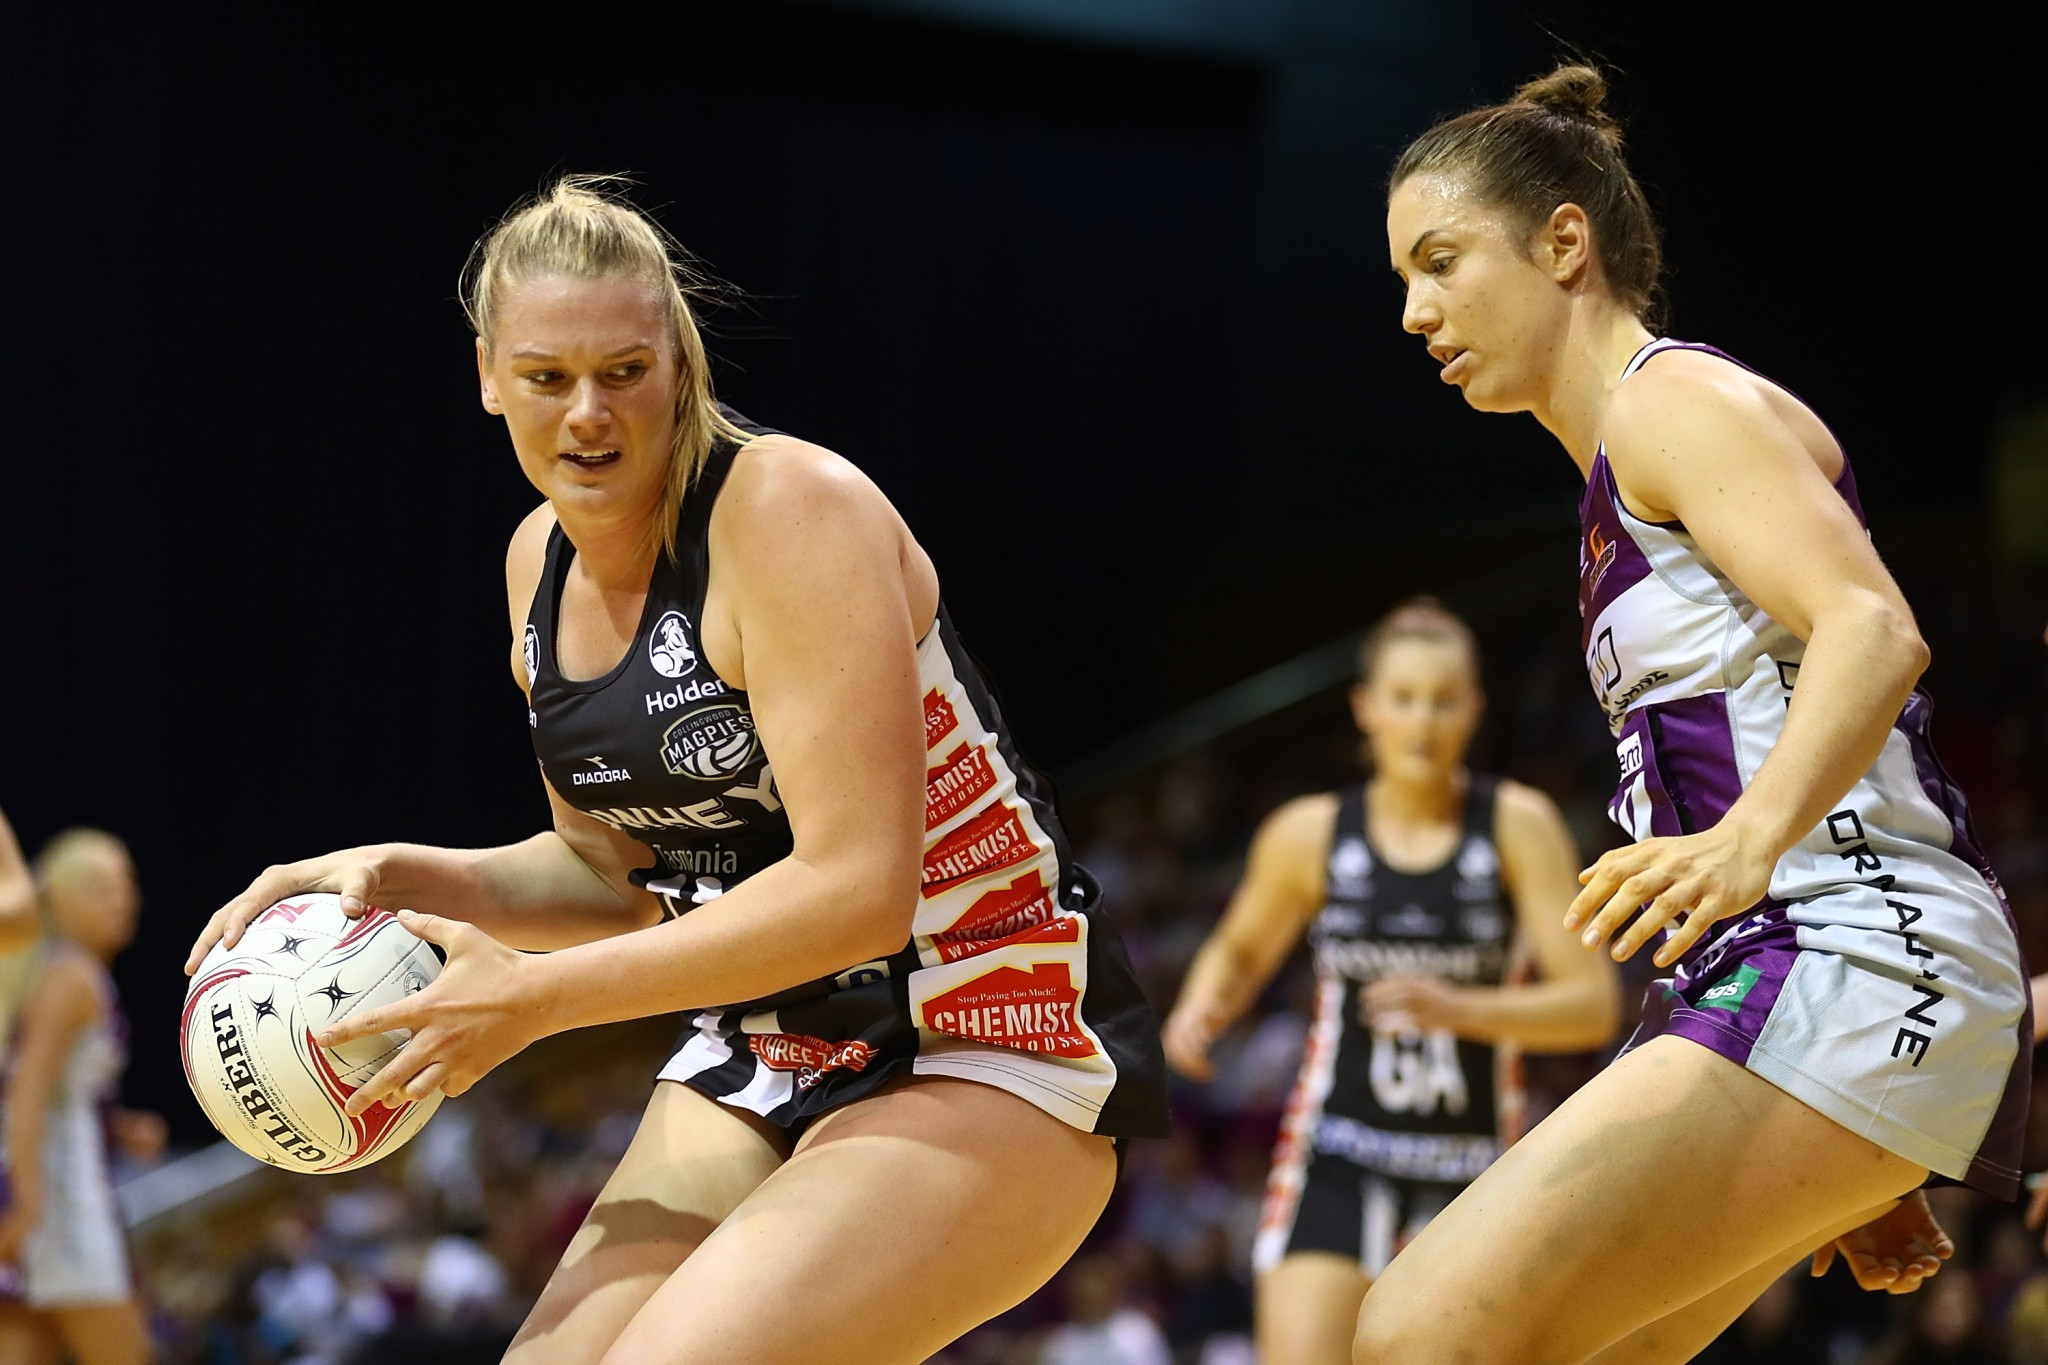 Suncorp Super Netball team Collingwood Magpies will play Wales as a warm-up for the Commonwealth Games ©Getty Images